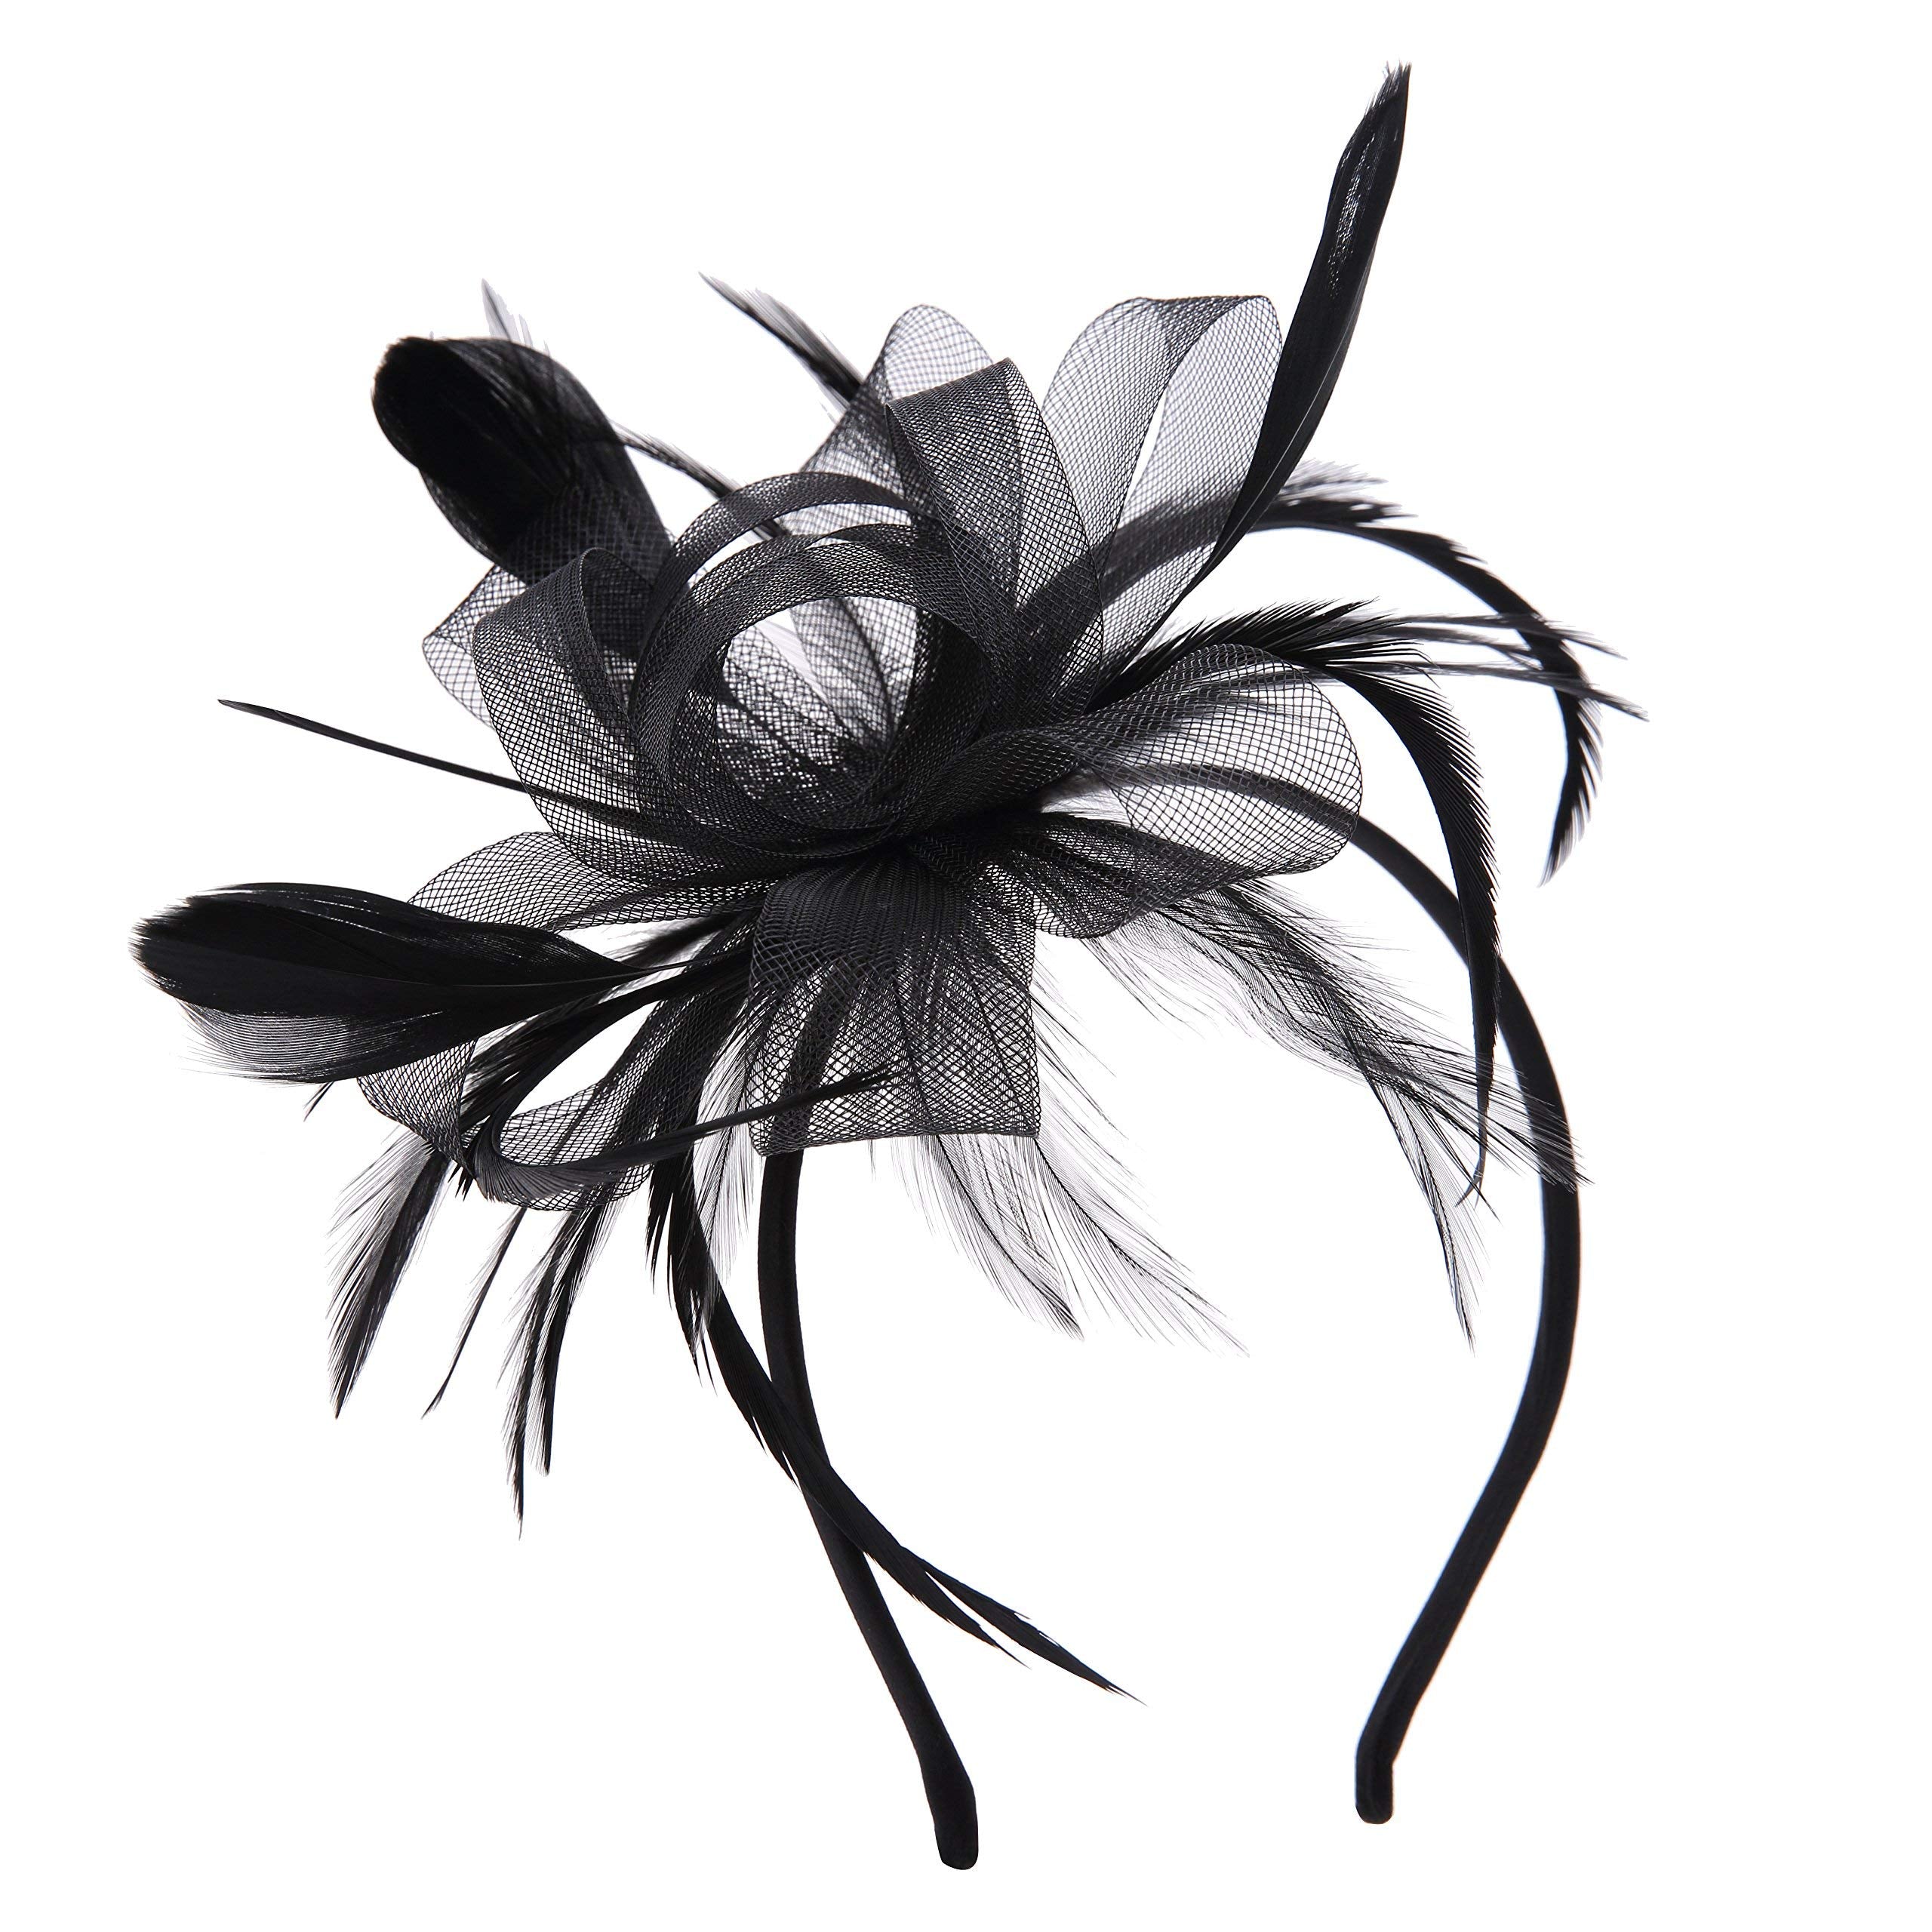 VGLOOK Flower Cocktail Tea Party Headwear Feather Fascinators Derby Hat for Girls and Ladies (Black)